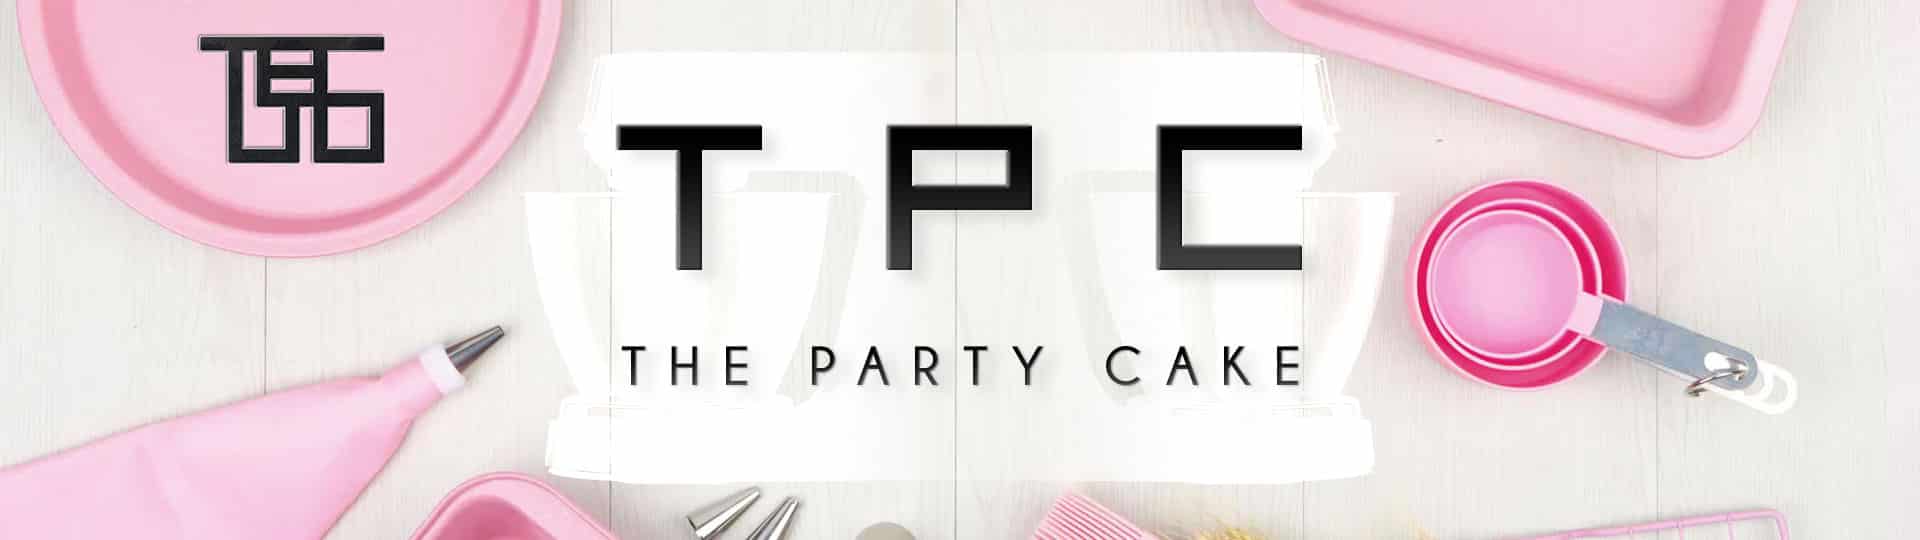 TPC - The Party Cake